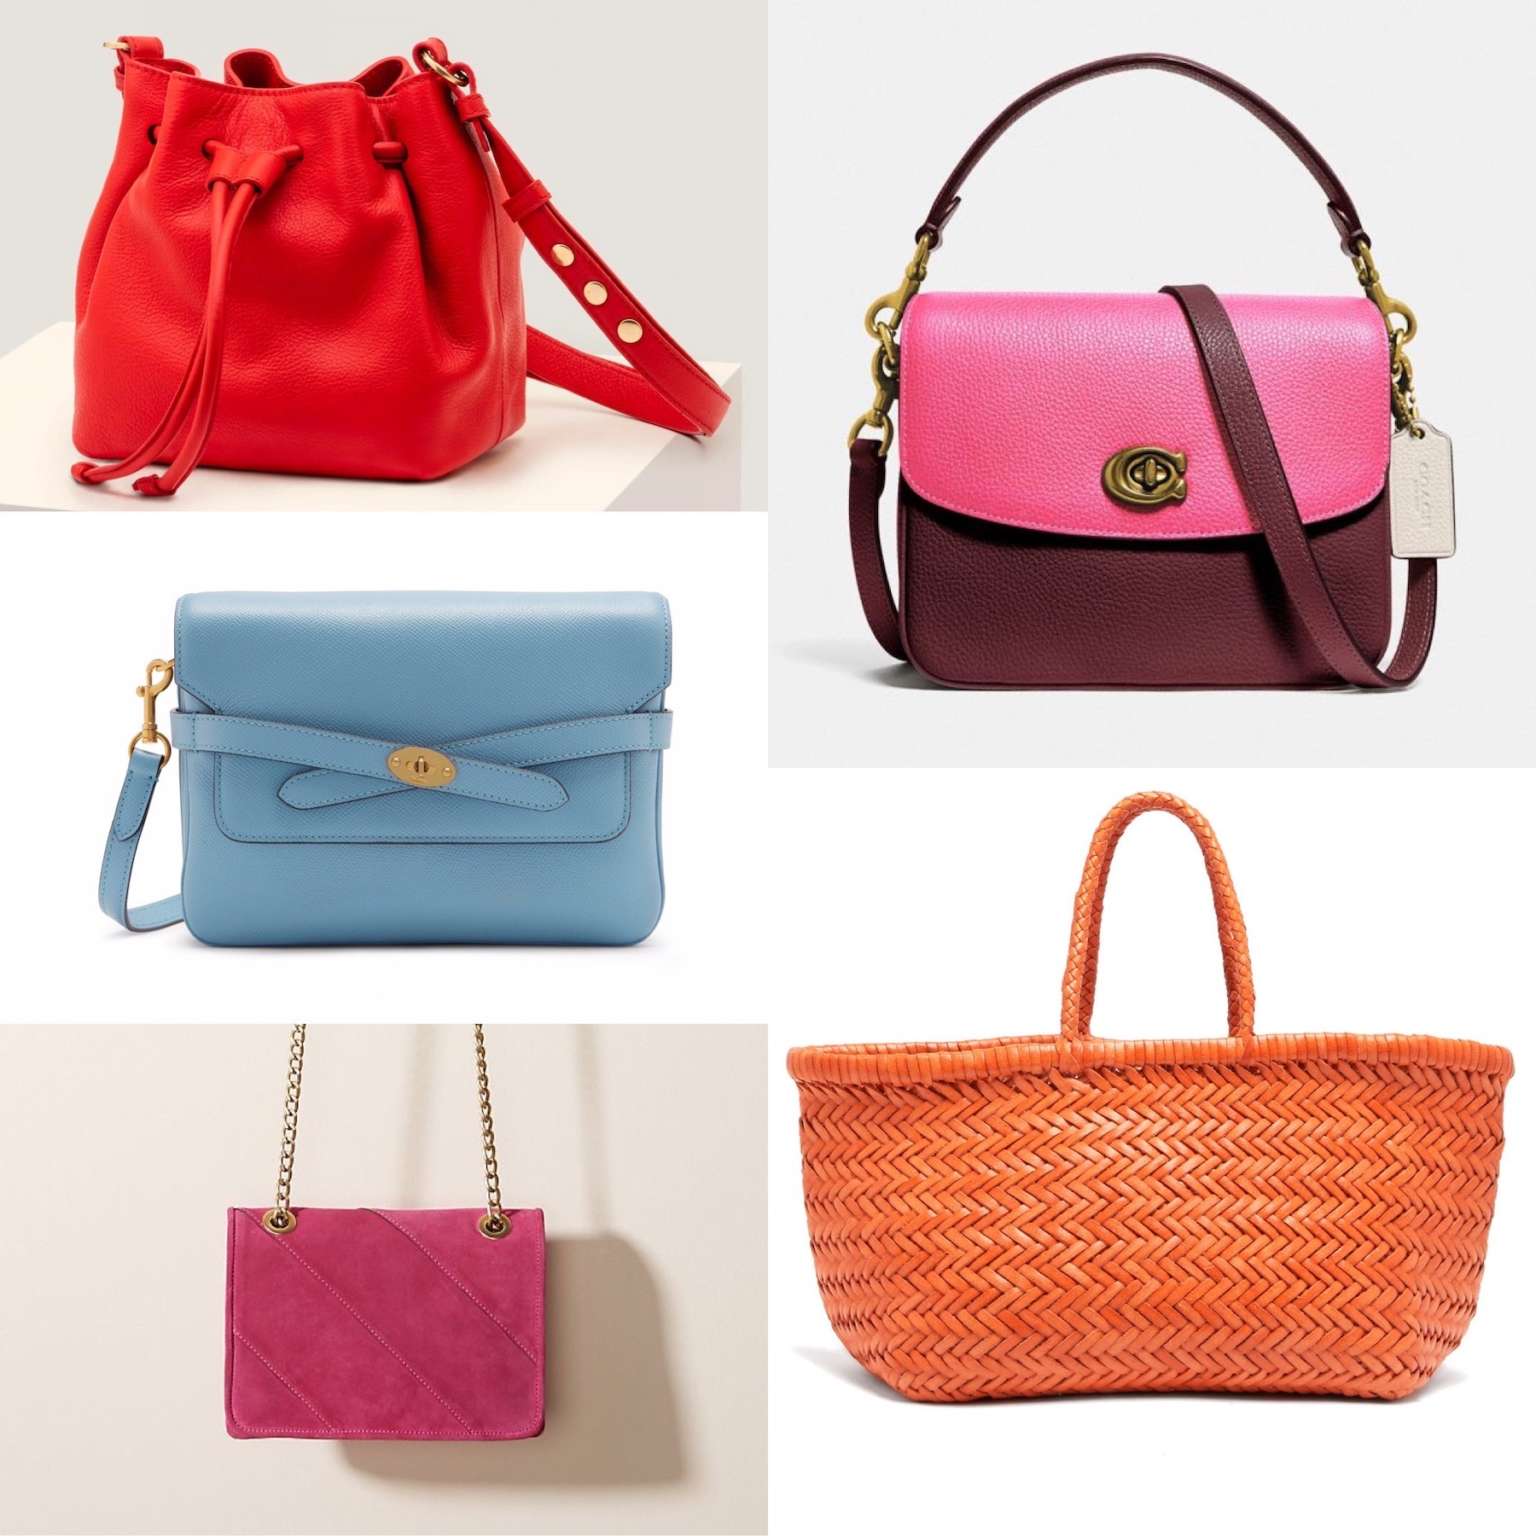 5 Colourful Handbags To Brighten Up Your Summer Outfits – JacquardFlower